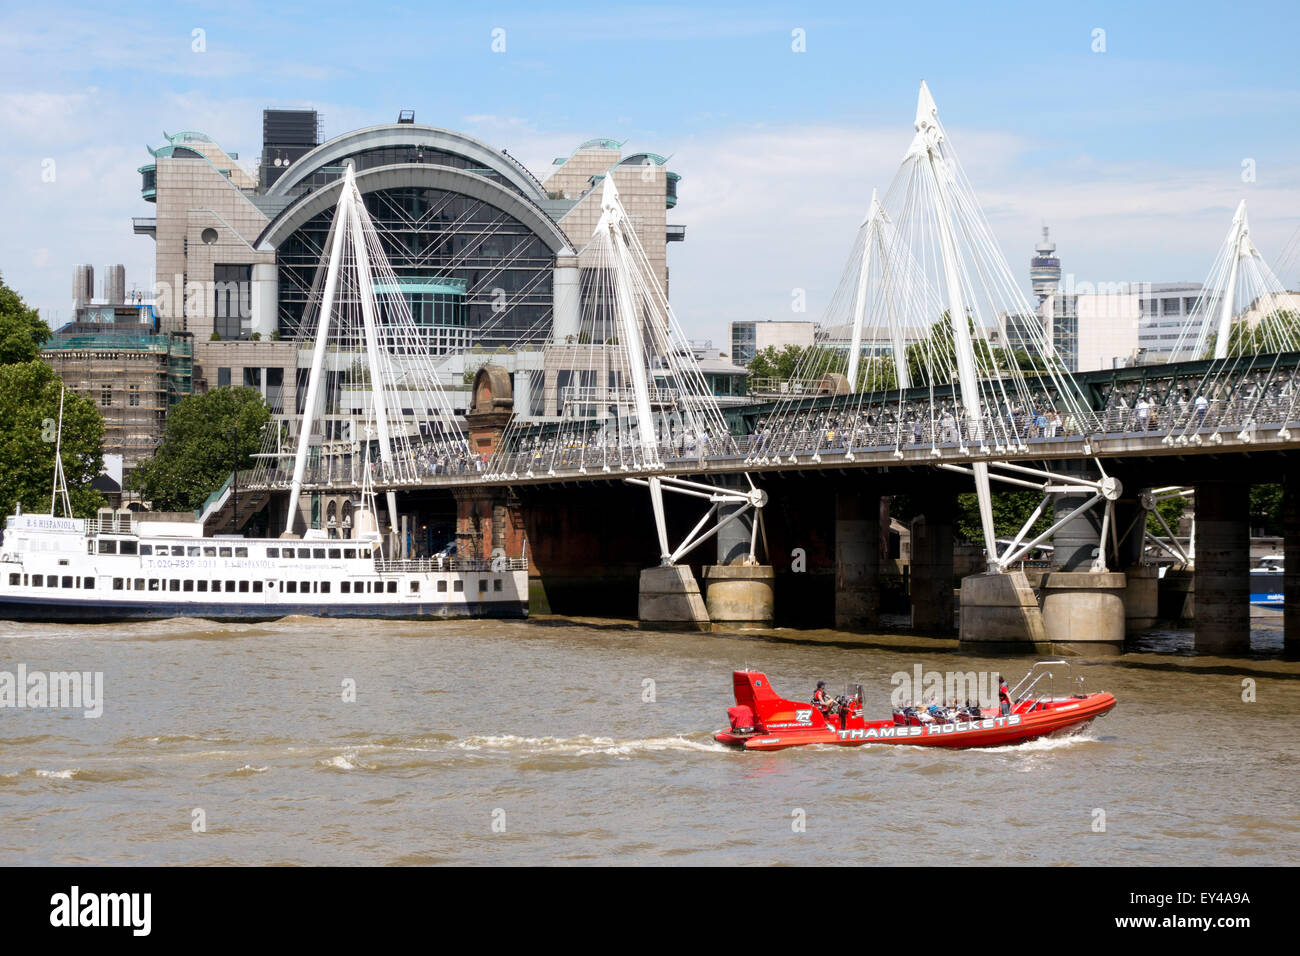 Charing Cross station and bridge seen from across the River Thames, London England UK Stock Photo